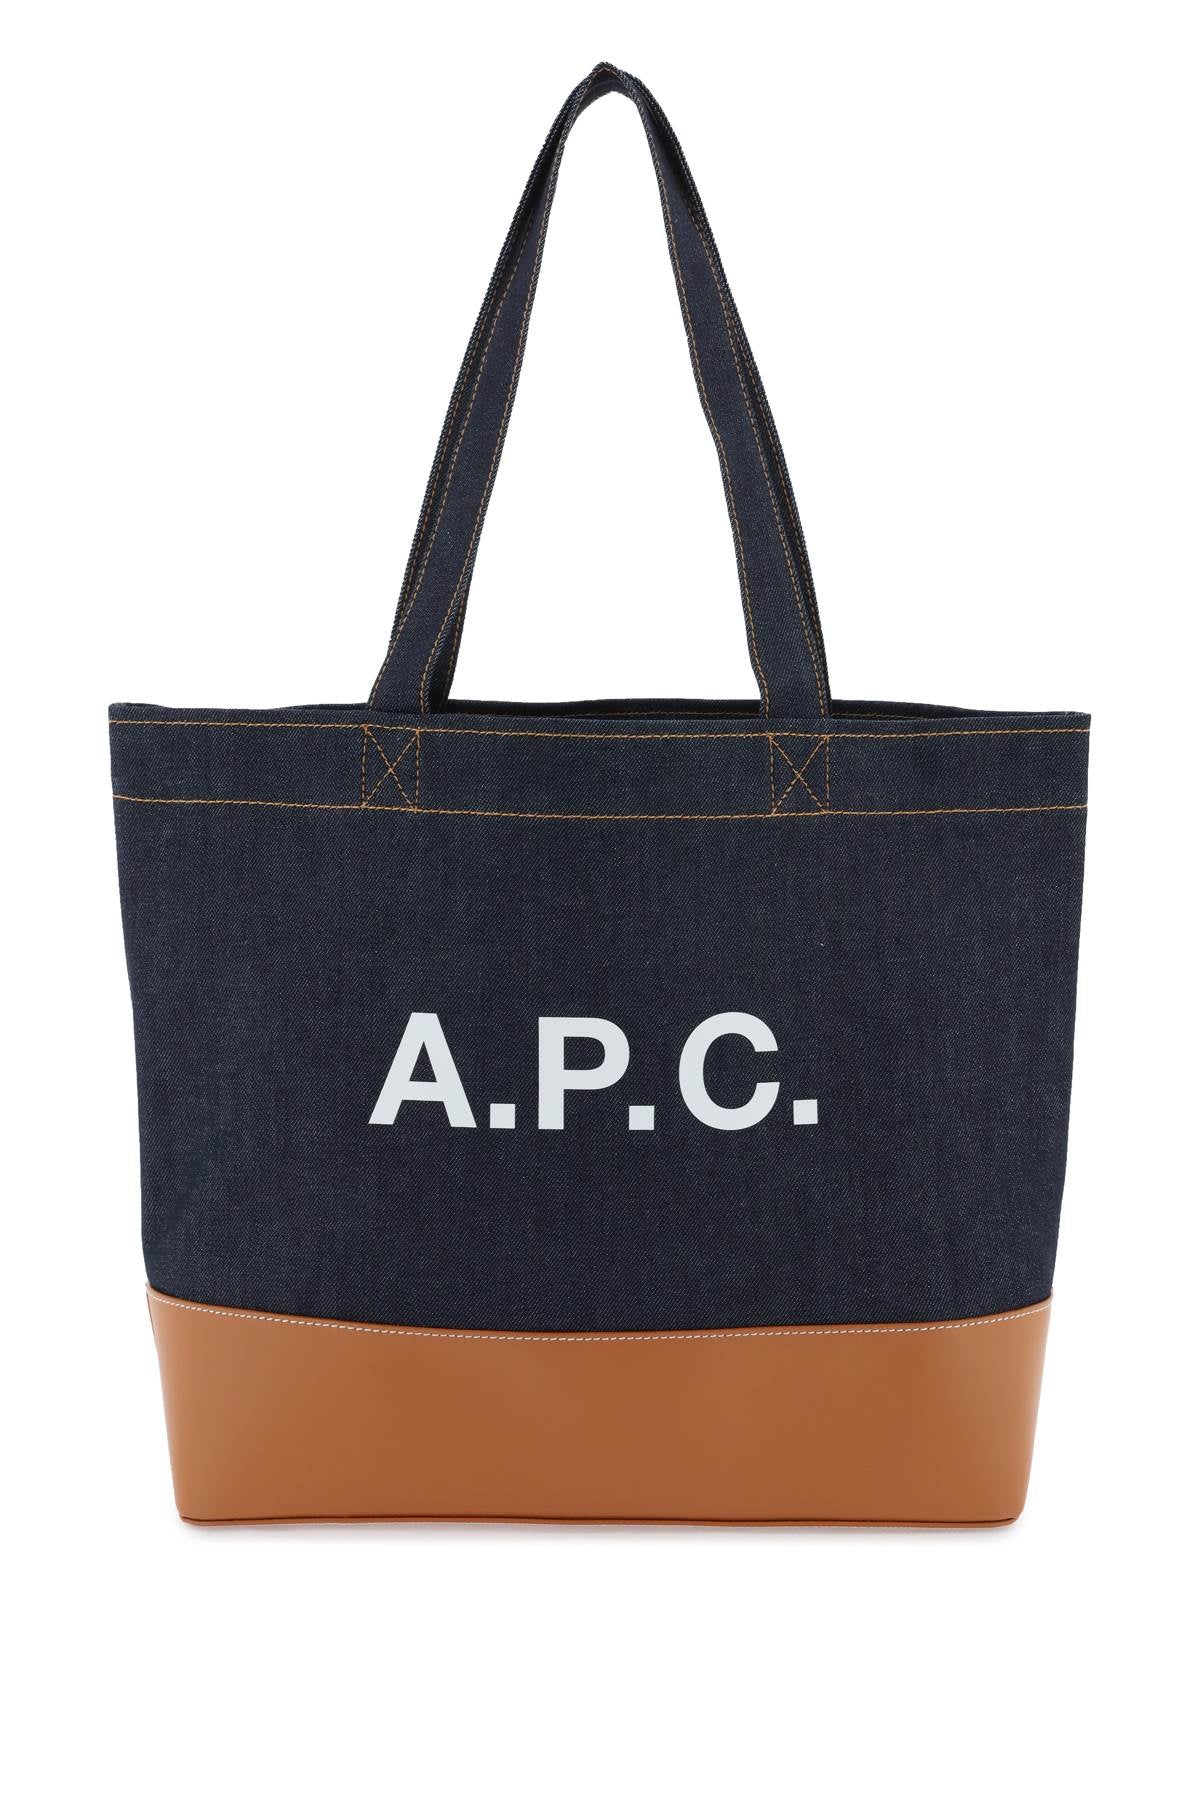 A.P.C. Unisex Axel Denim Tote Bag with Leather Base and Contrast Stitching